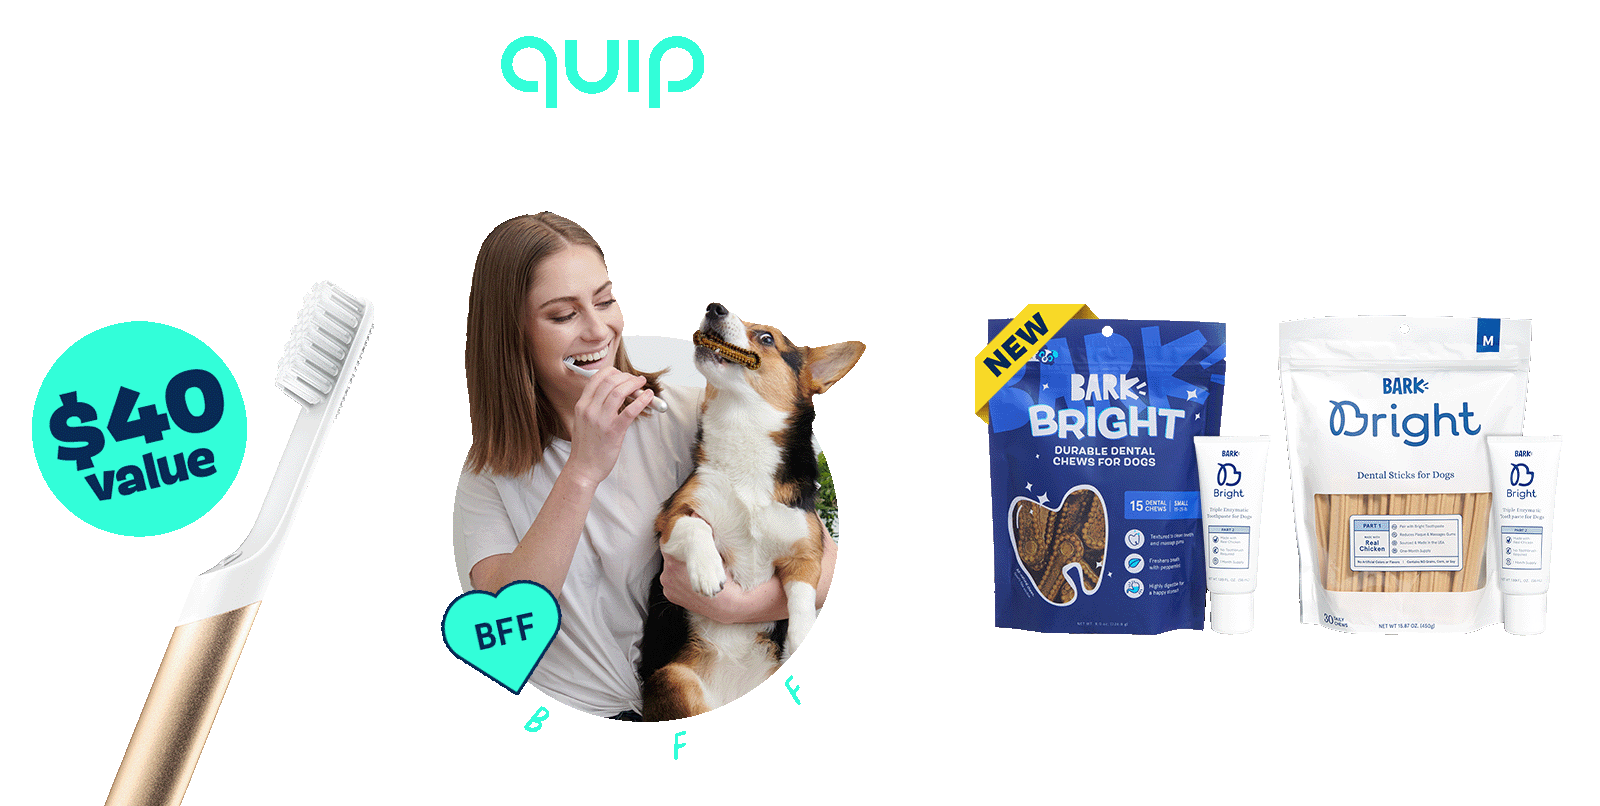 FREE QUIP TOOTHBRUSH with a dental subscription - $40 value - brushing friends forever - PICK YOUR CHEW STYLE